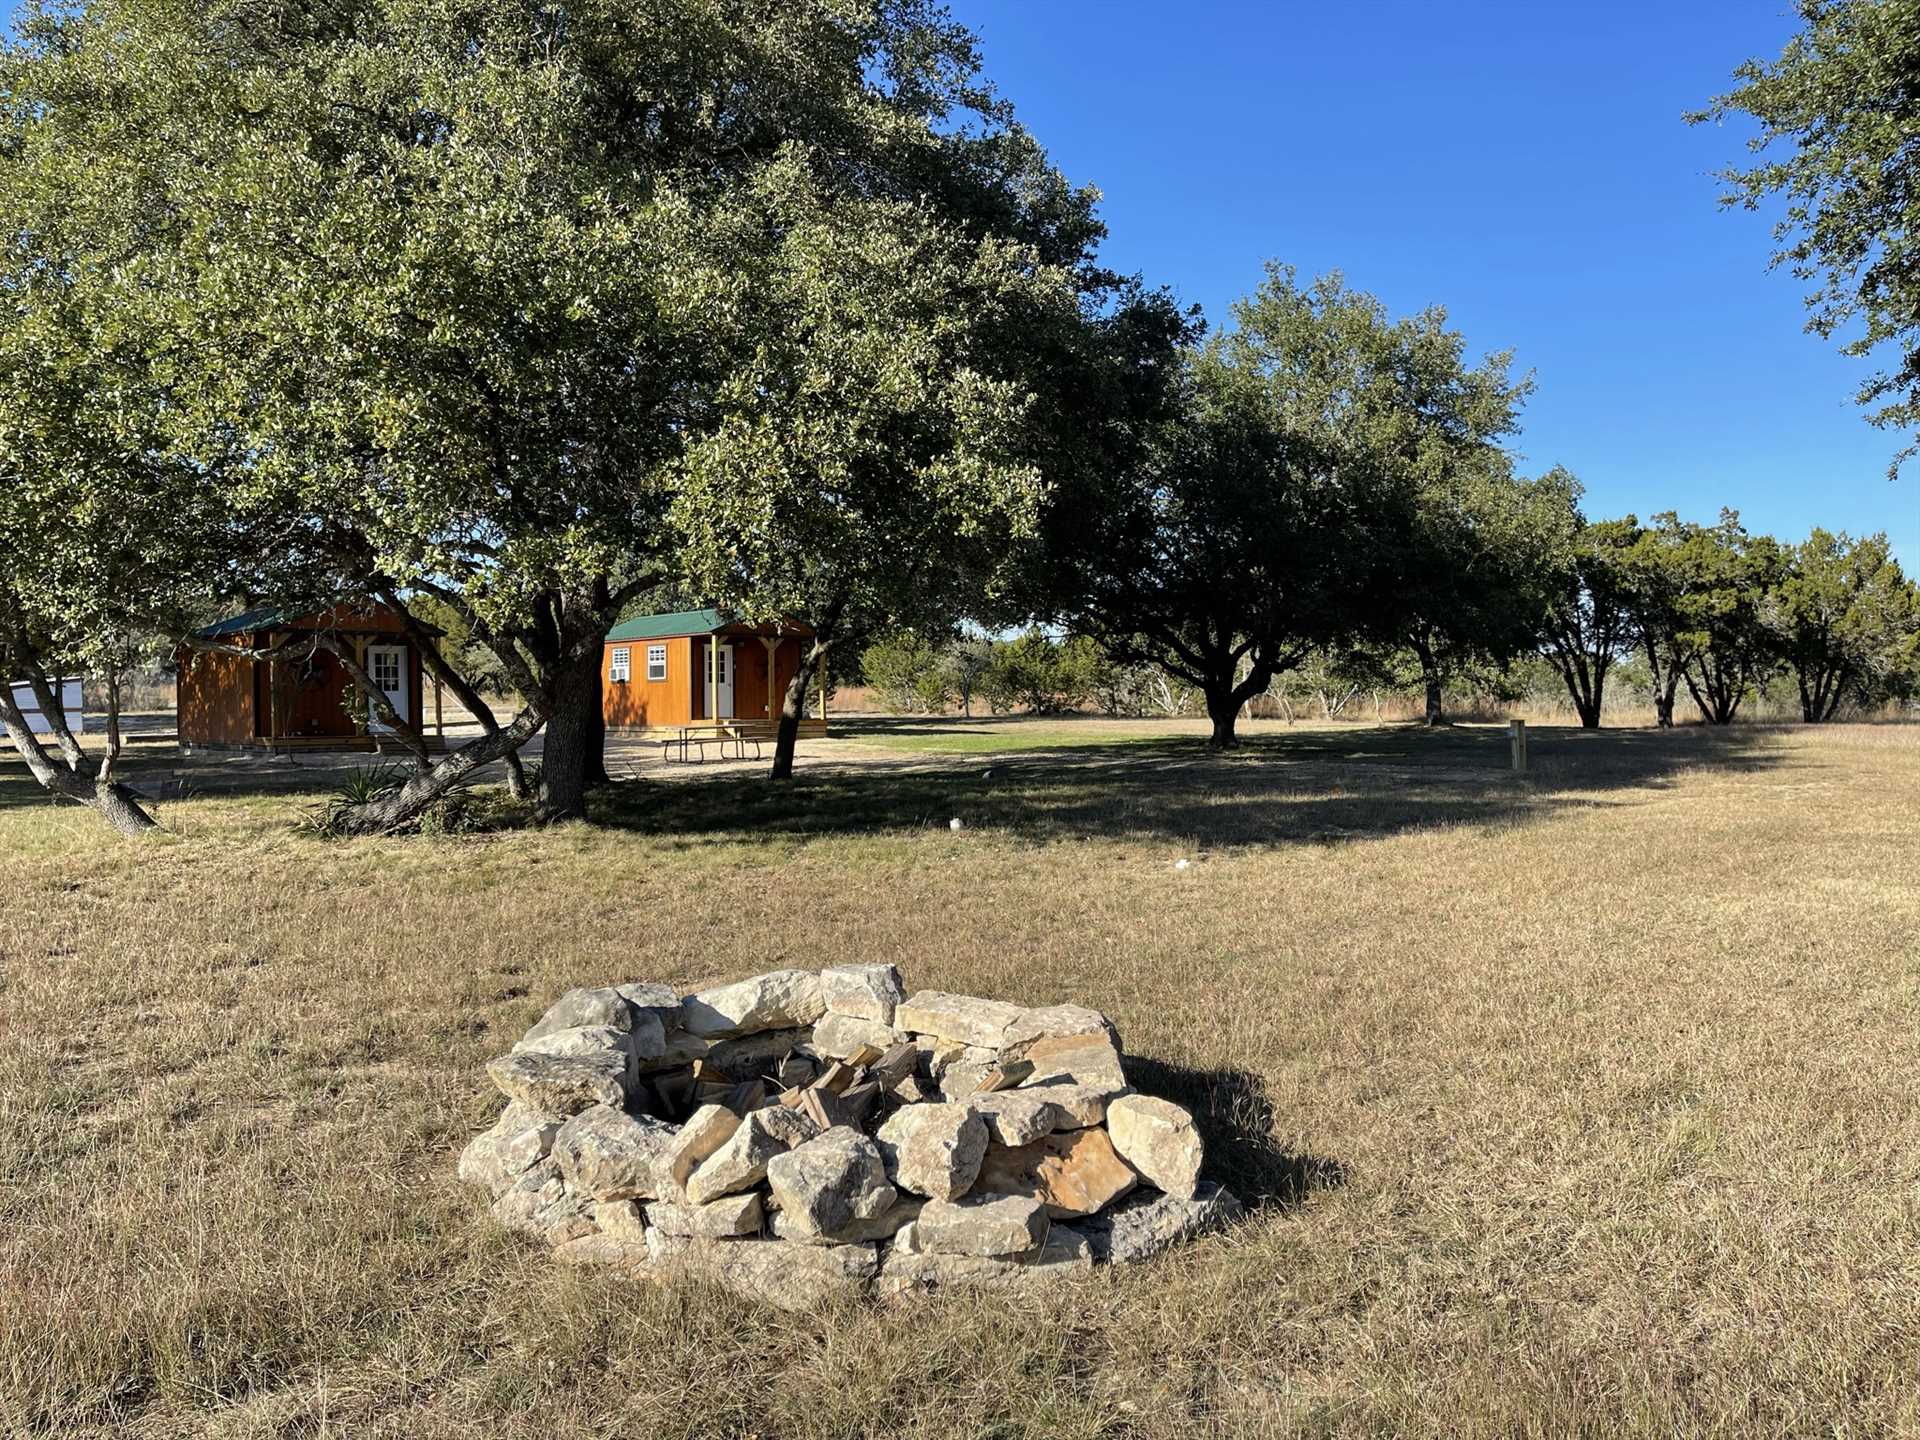                                                 Gather around the fire pit for conversation, laughter, and s'mores in your Hill Country escape! There's also a charcoal pit for grilling.